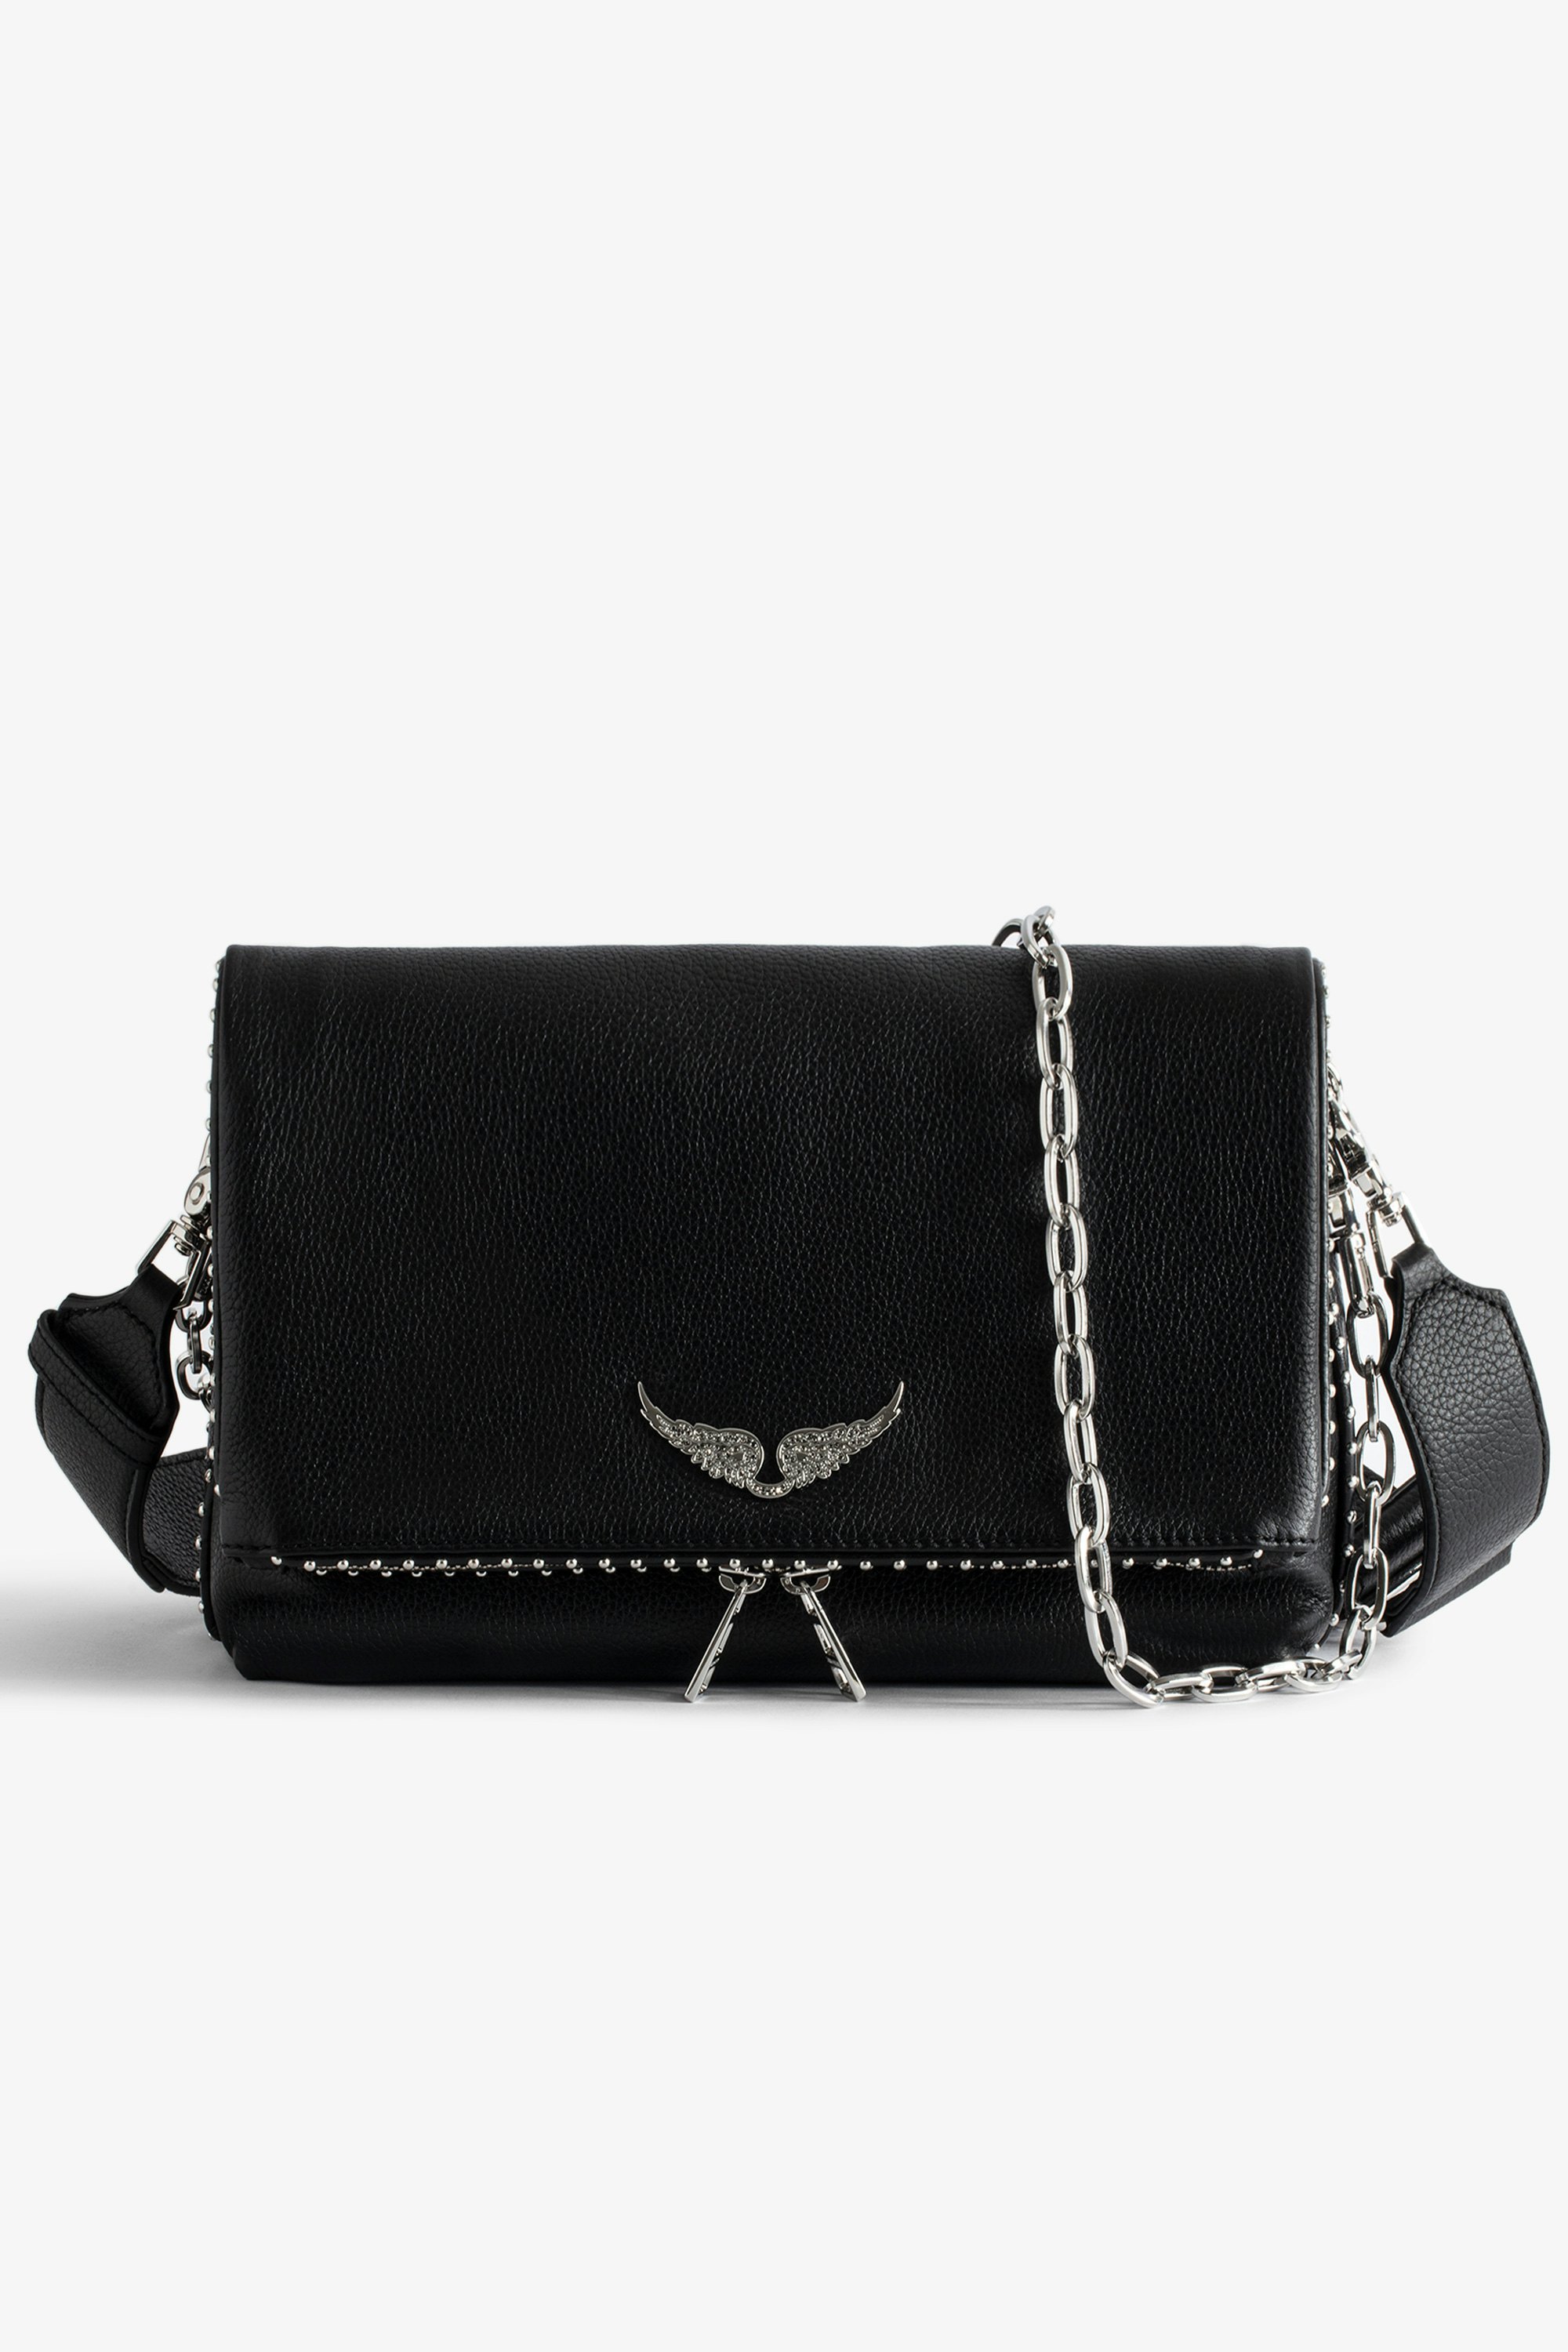 Rocky Studs バッグ - Women’s black leather bag embellished with studs.